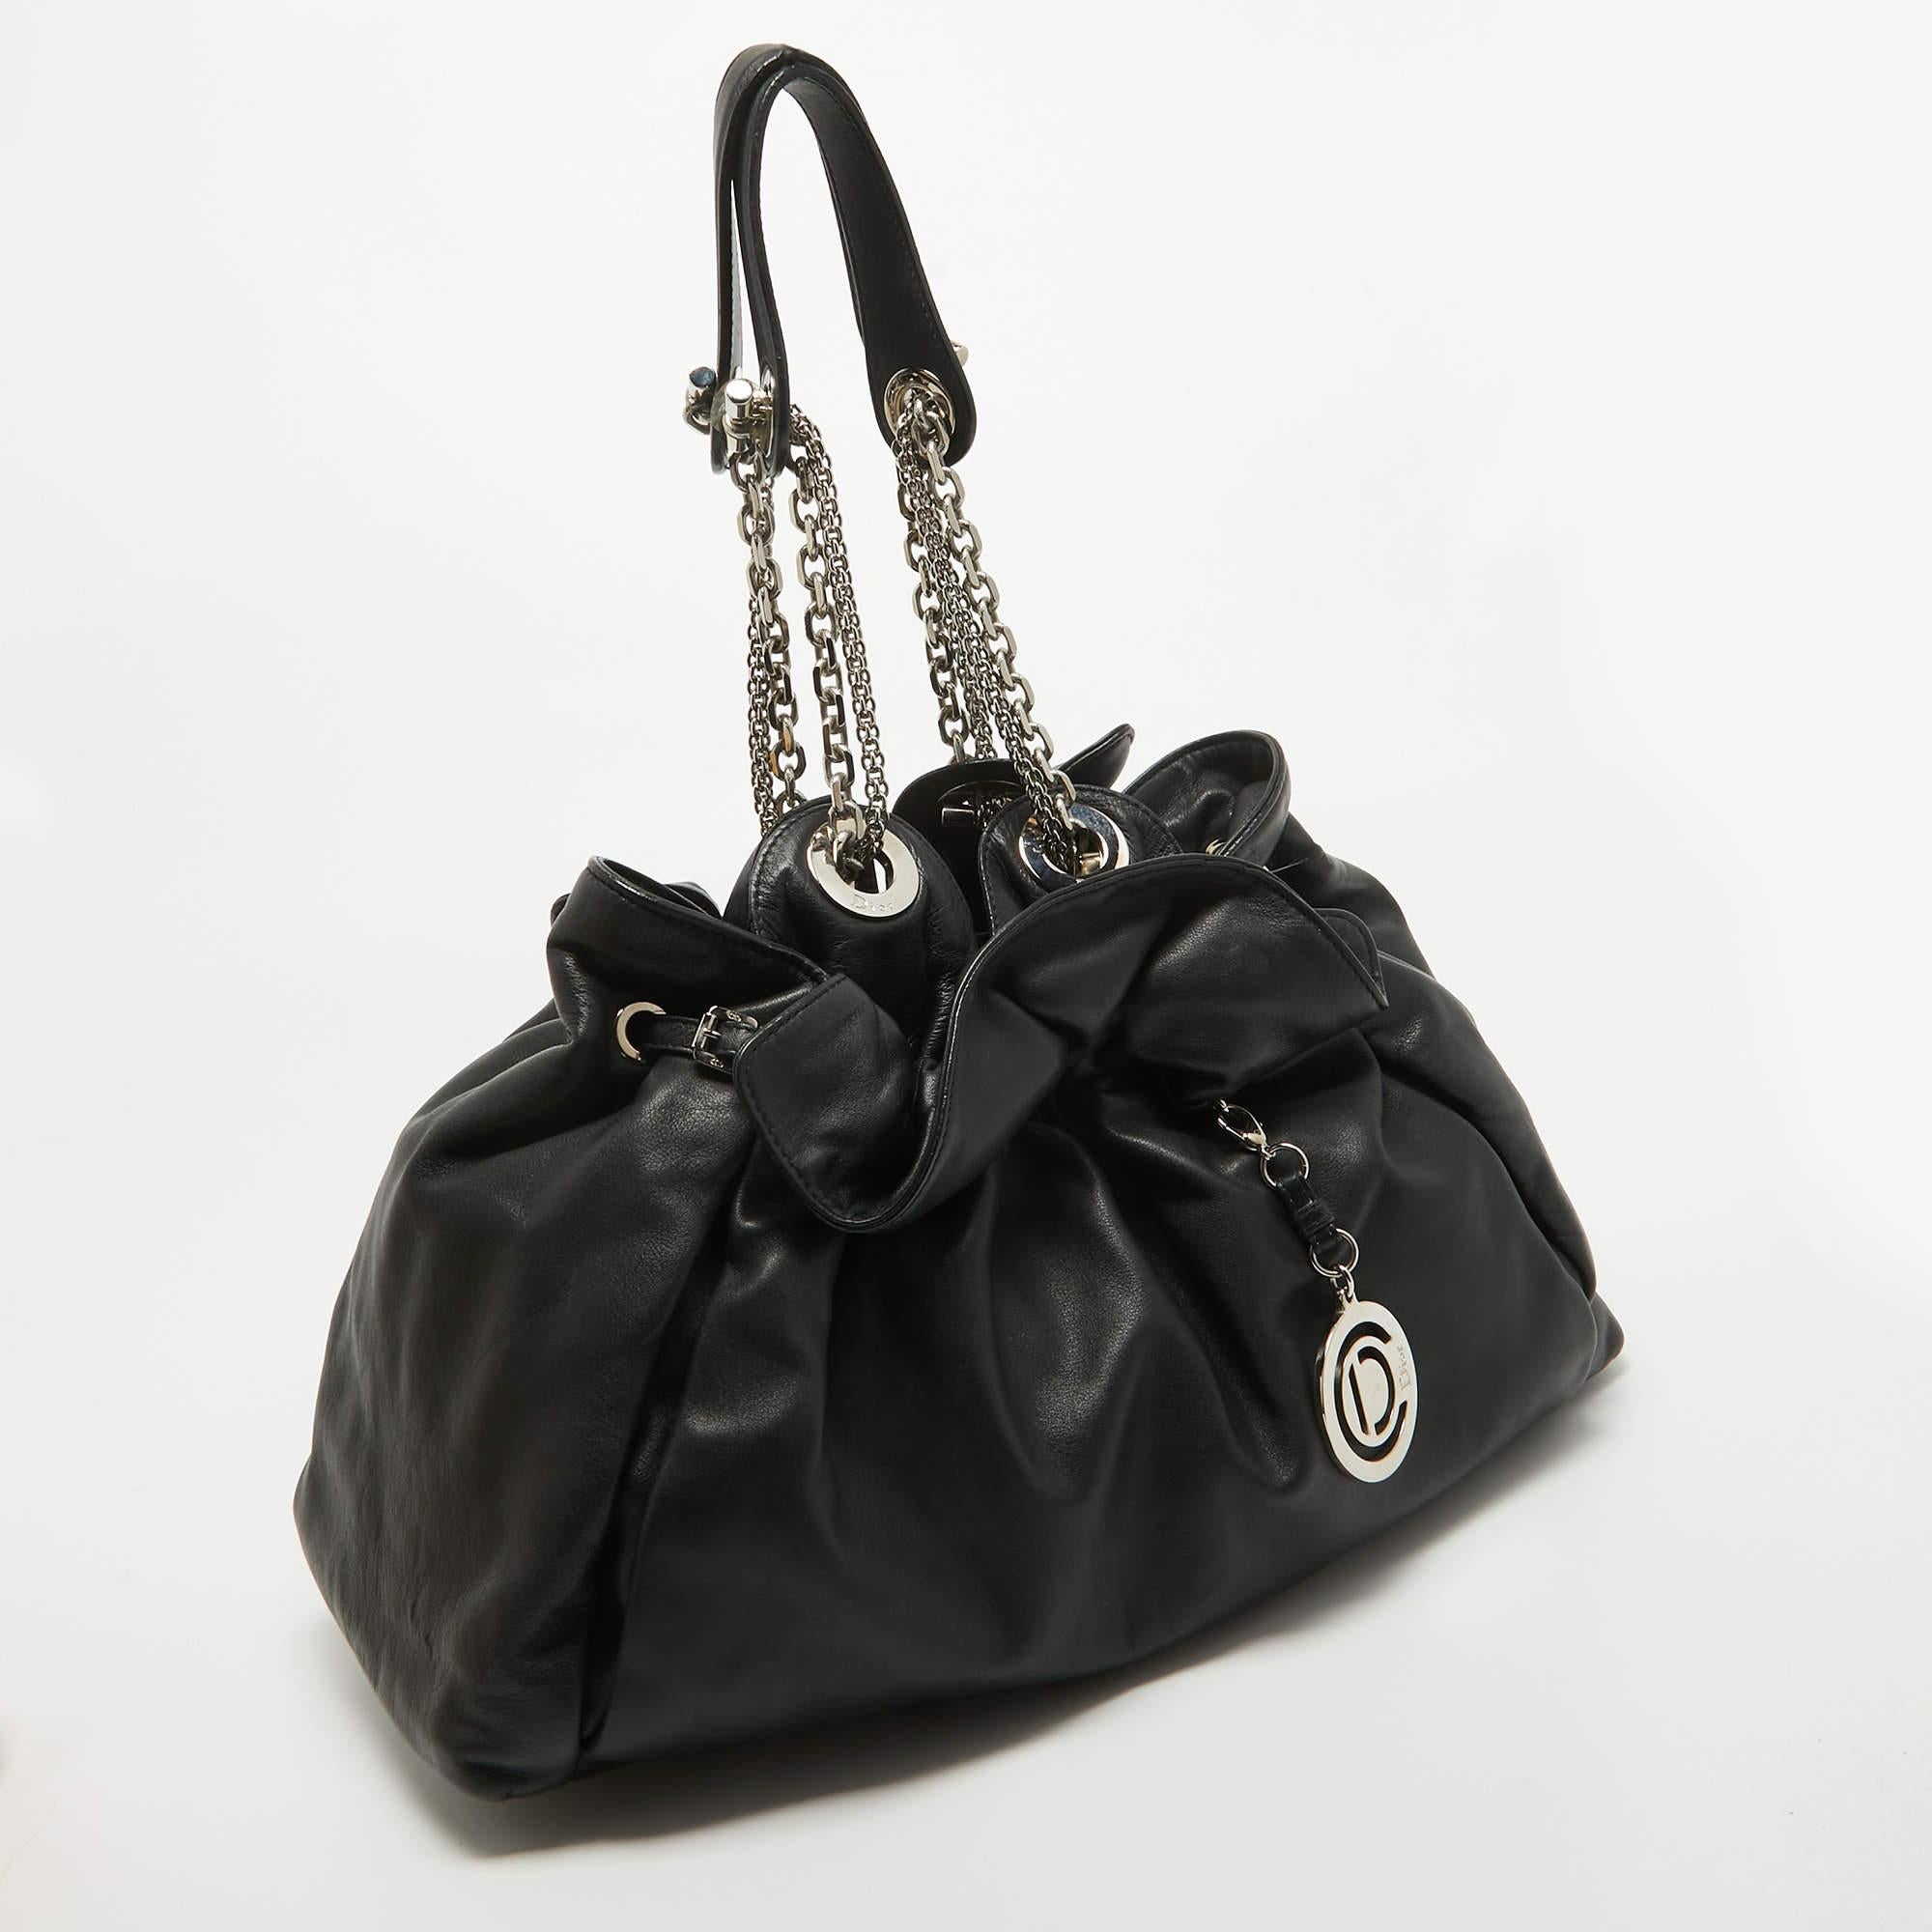 Stylish handbags never fail to make a fashionable impression. Make this designer Dior hobo yours by pairing it with your sophisticated workwear as well as chic casual looks.

